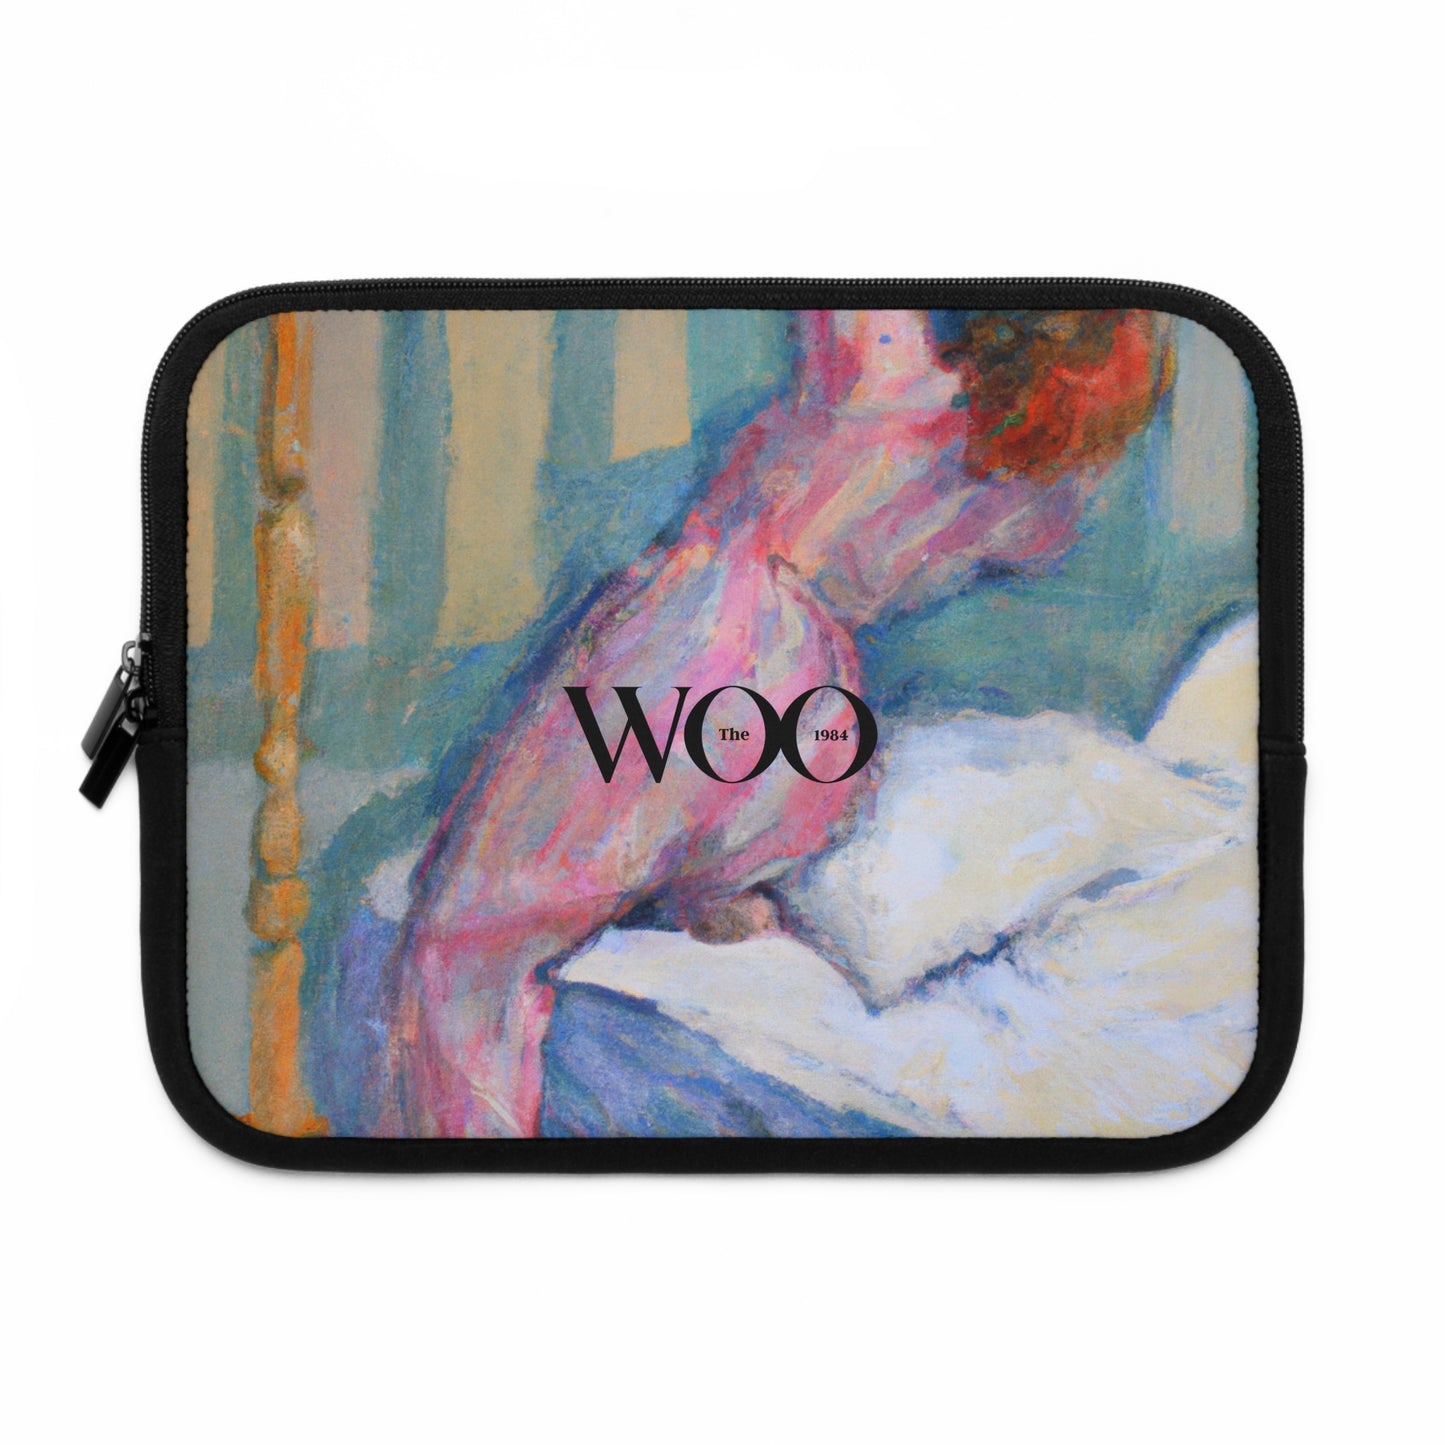 WFB 'Work From bed' - Laptop Sleeve